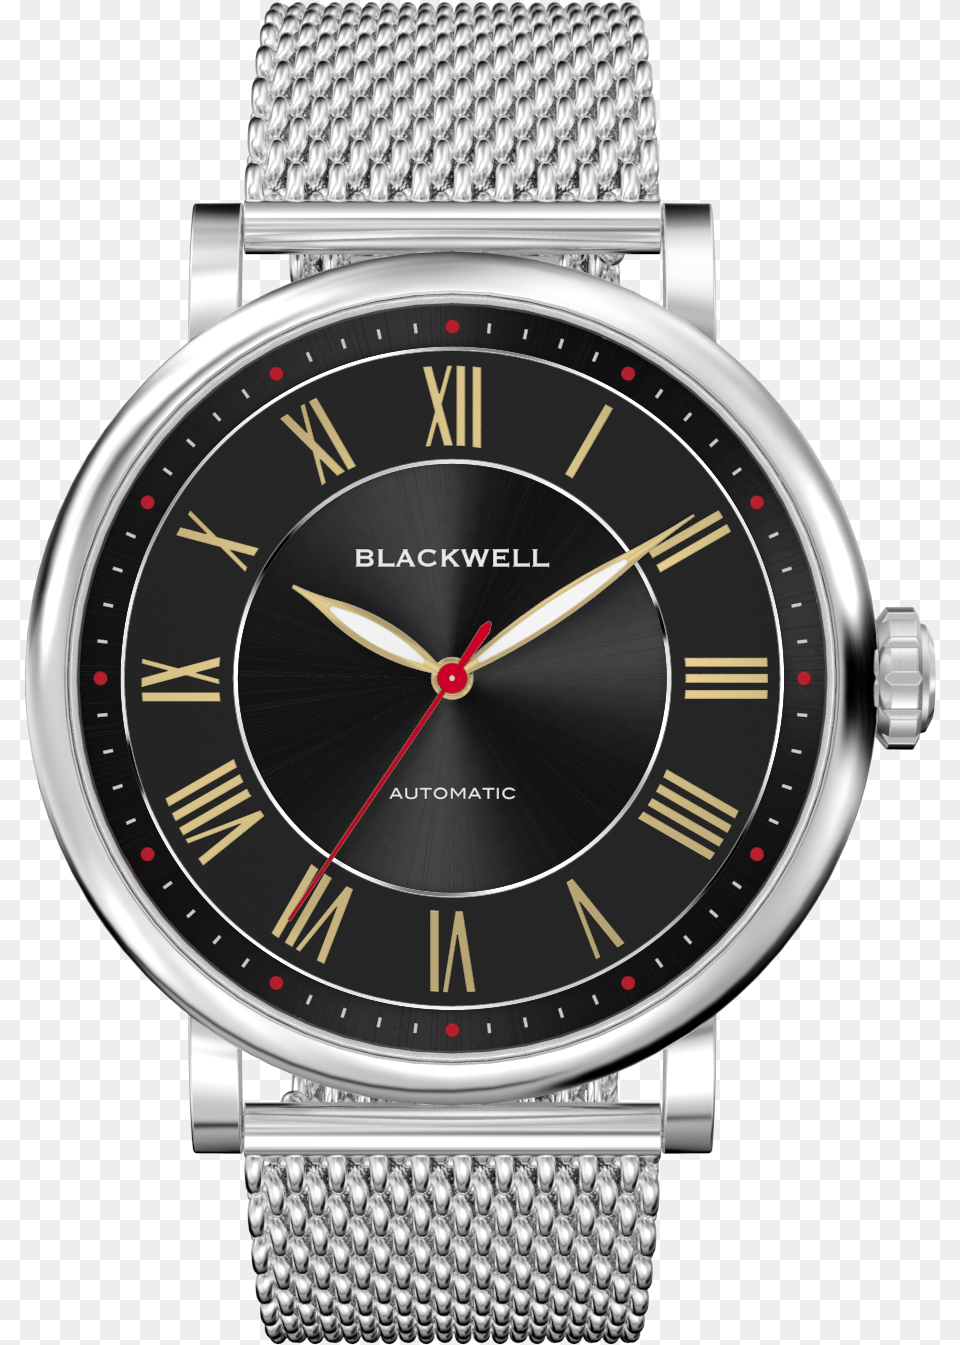 Blackwell 4 F F Blackwell 4 F P Blackwell Blackwell Automatic Watch, Arm, Body Part, Person, Wristwatch Free Png